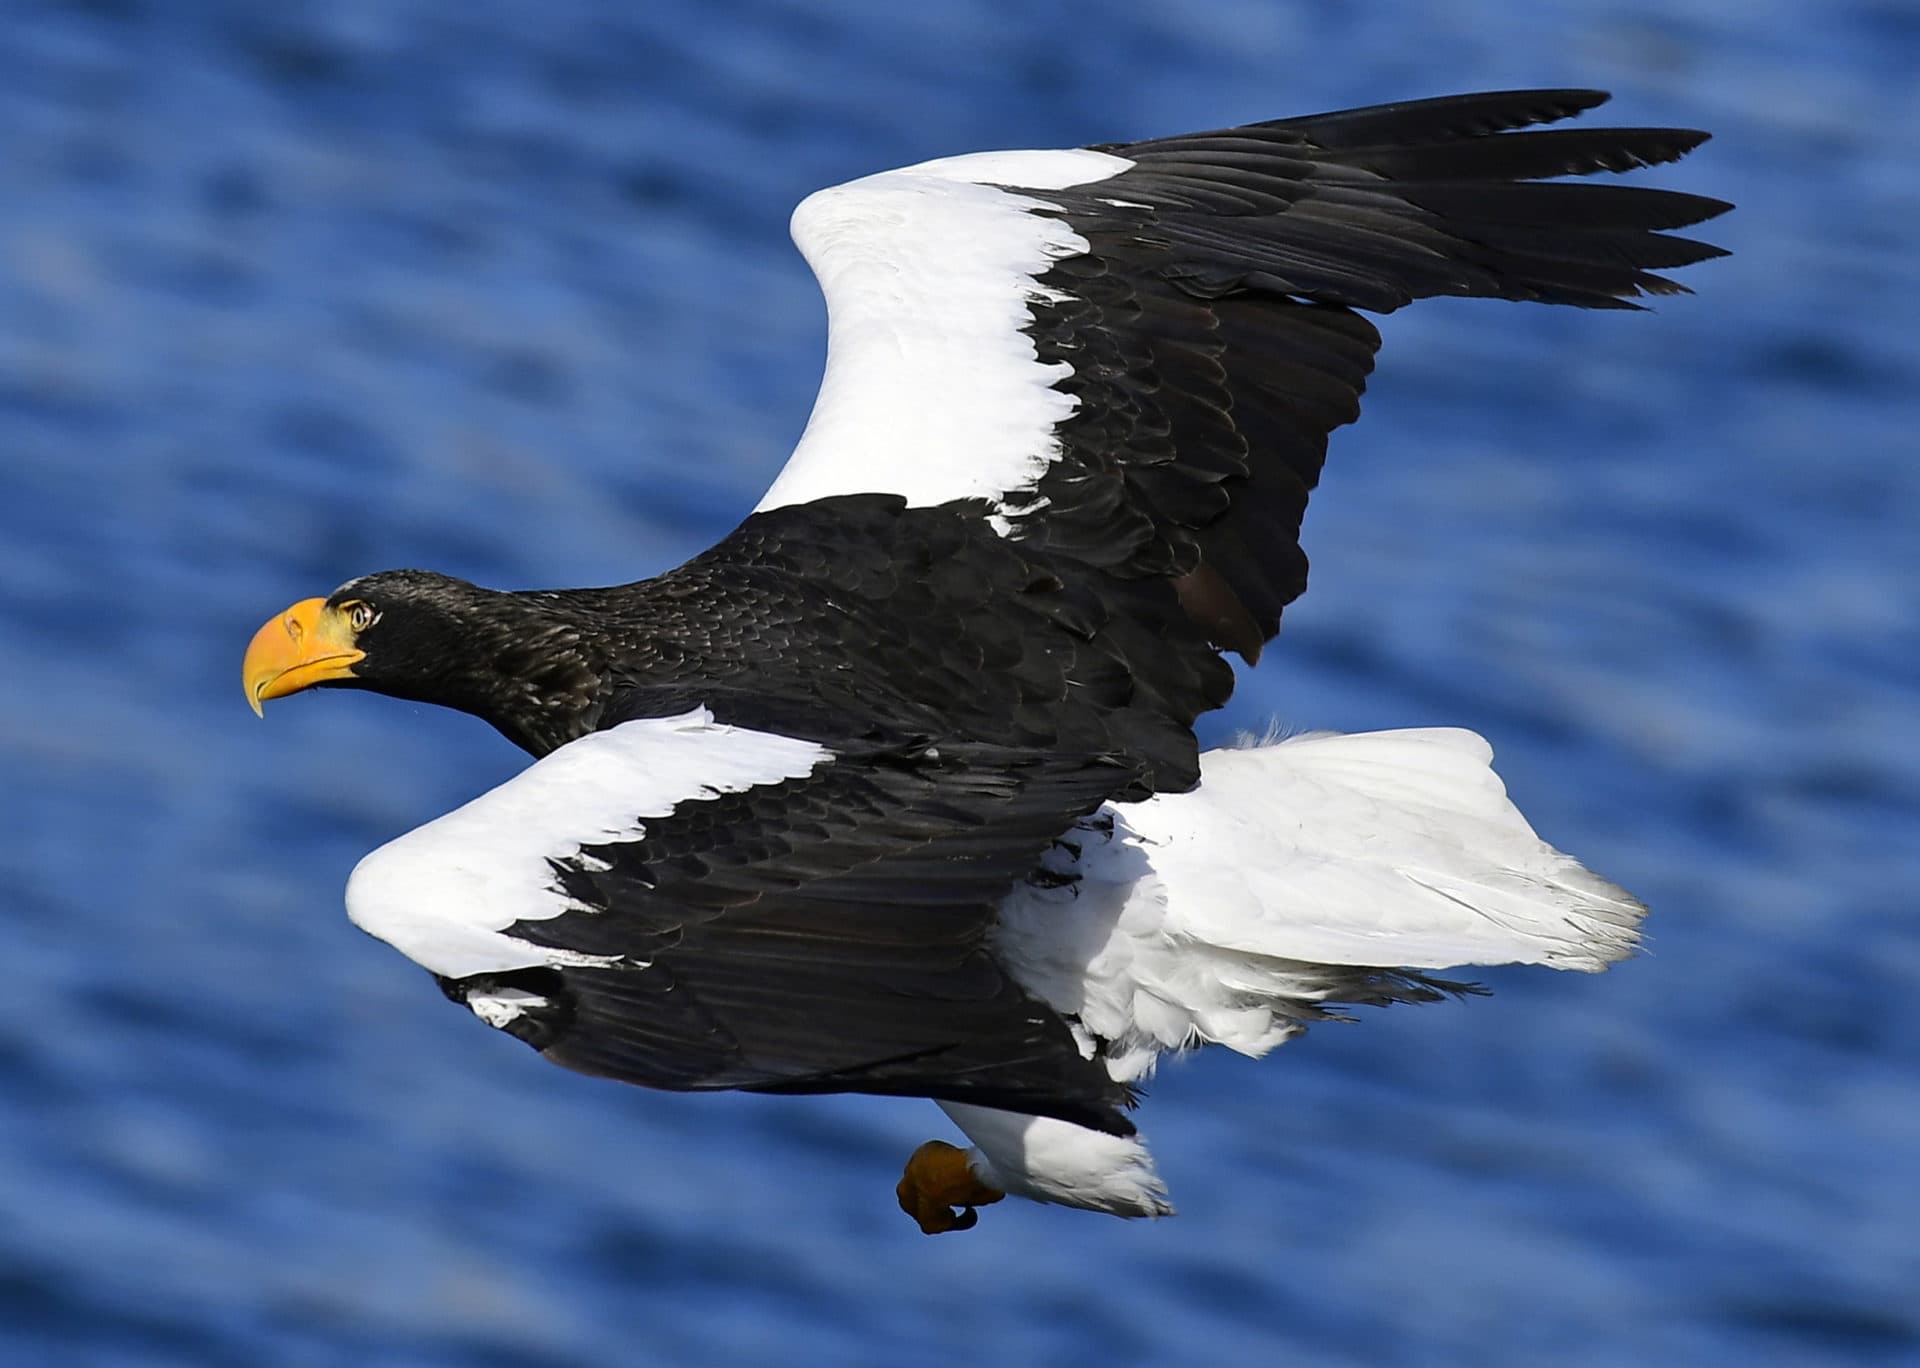 A Steller's sea eagle near Vladivostok, Russia. A similar eagle, believed to be lost, has been spotted in Massachusetts and Maine. (Yuri Smityuk/TASS via Getty Images)